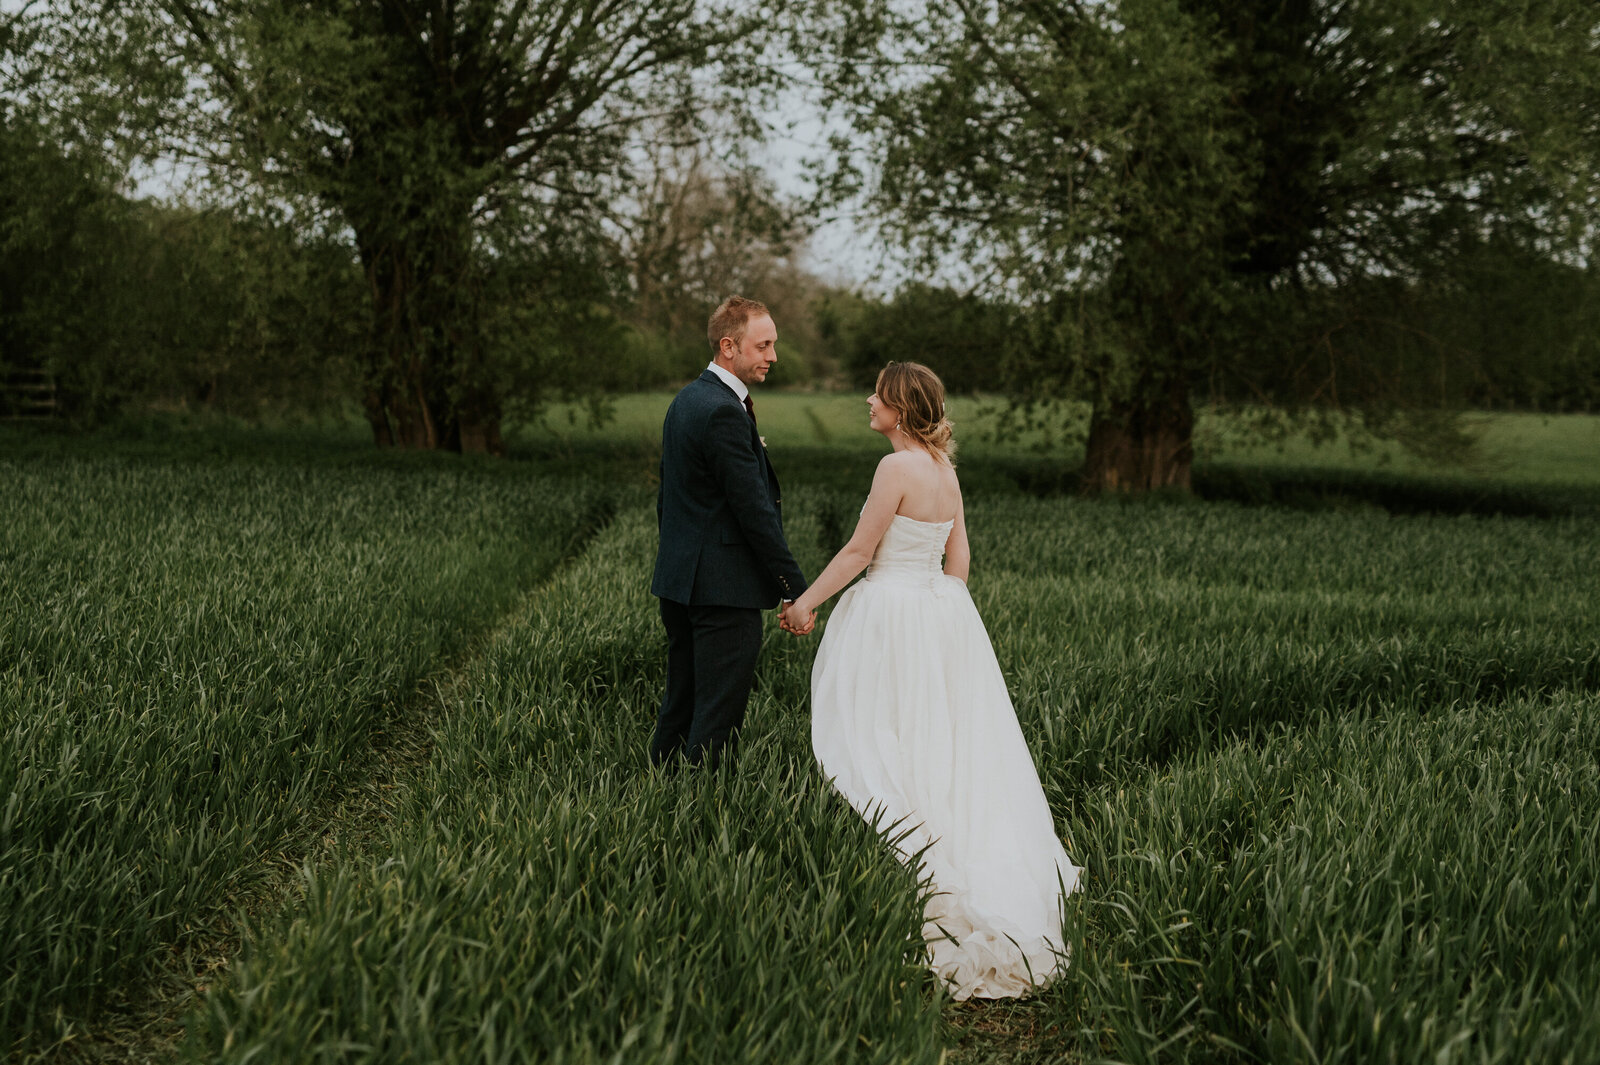 Bride and grromholding hands in a wheat field